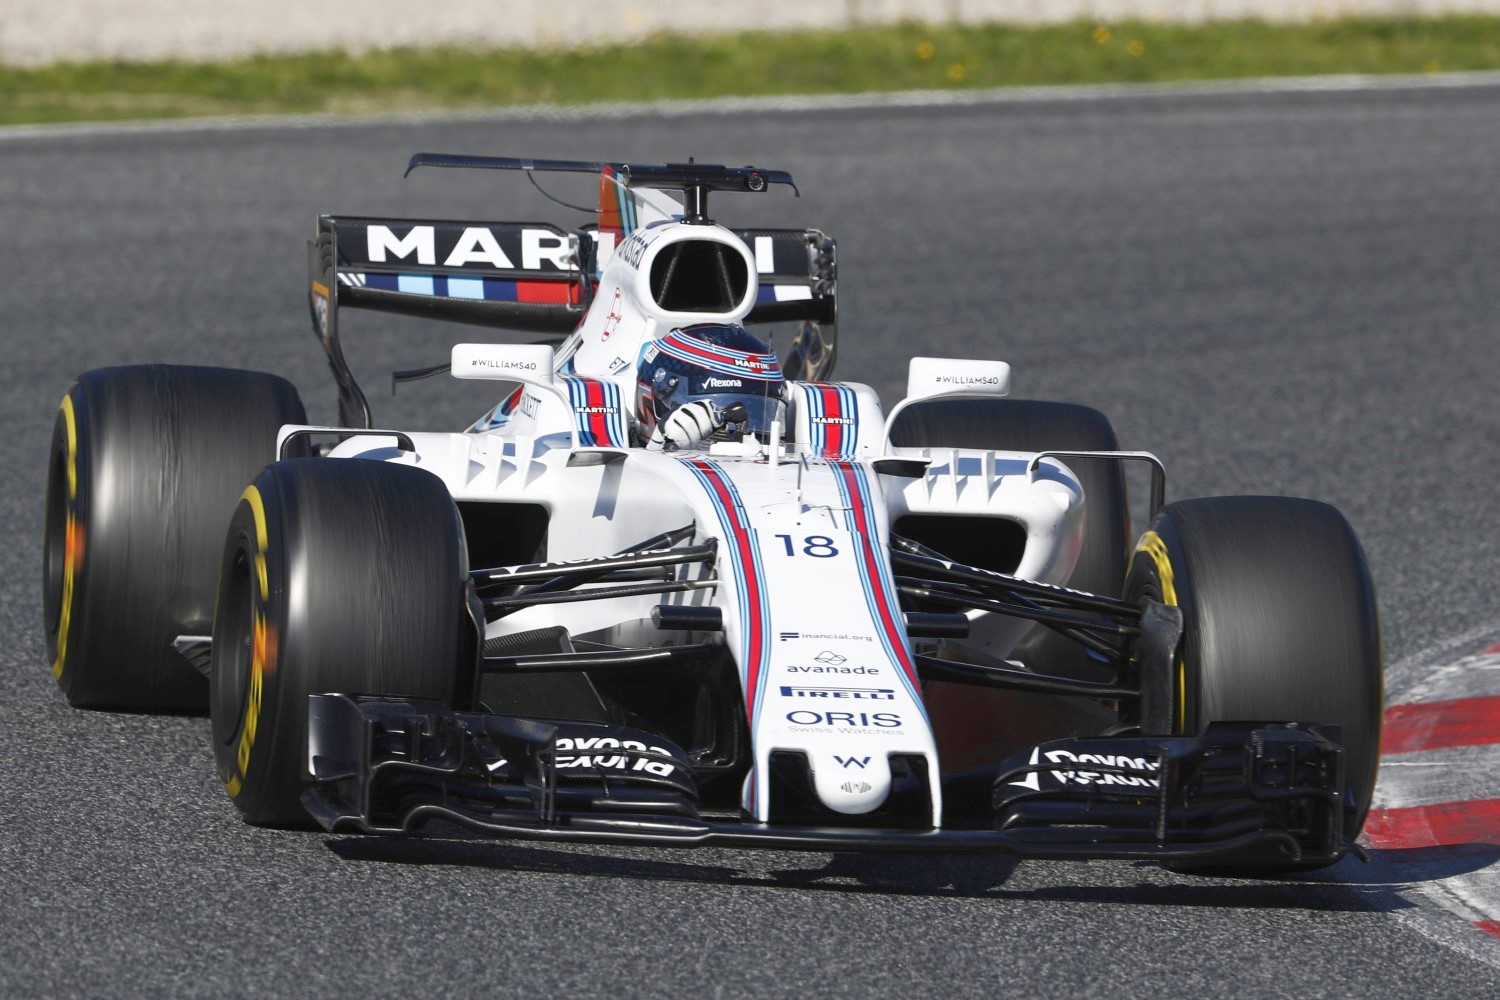 Lance Stroll, has check will drive